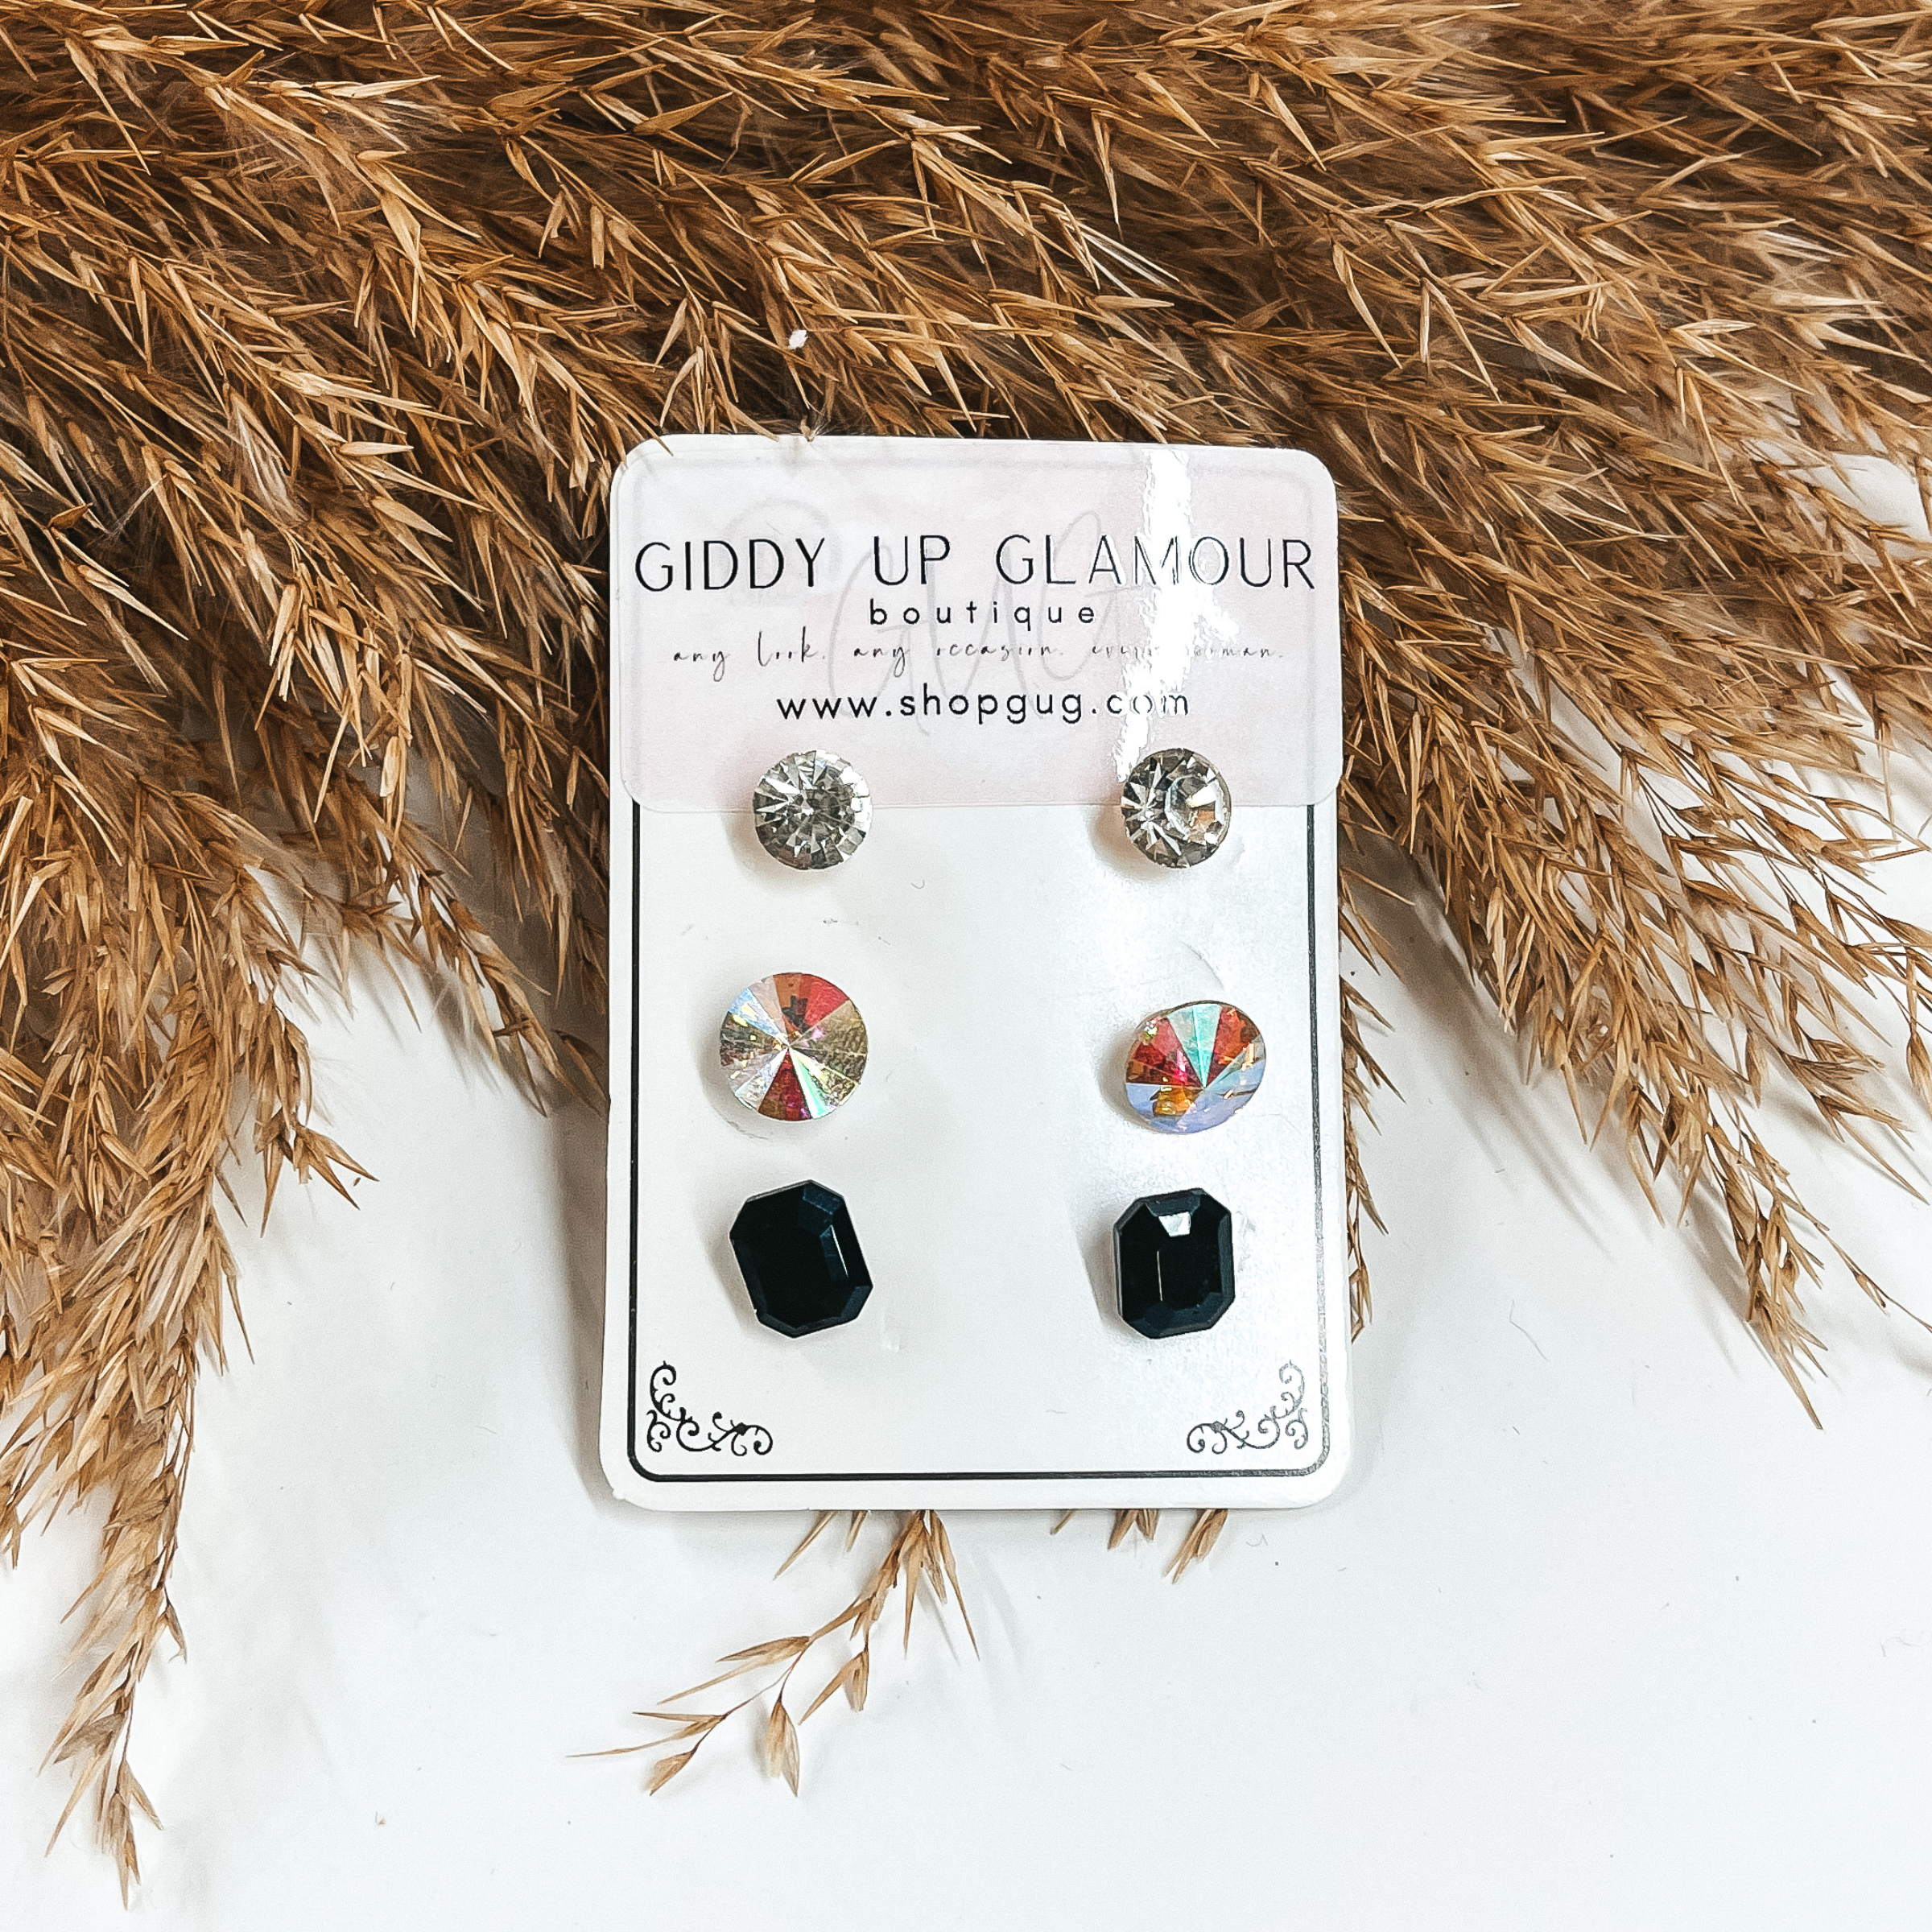 Buy 3 for $10 | Pack of Three | Faux Crystal Stud Earrings in Rectangles - Giddy Up Glamour Boutique